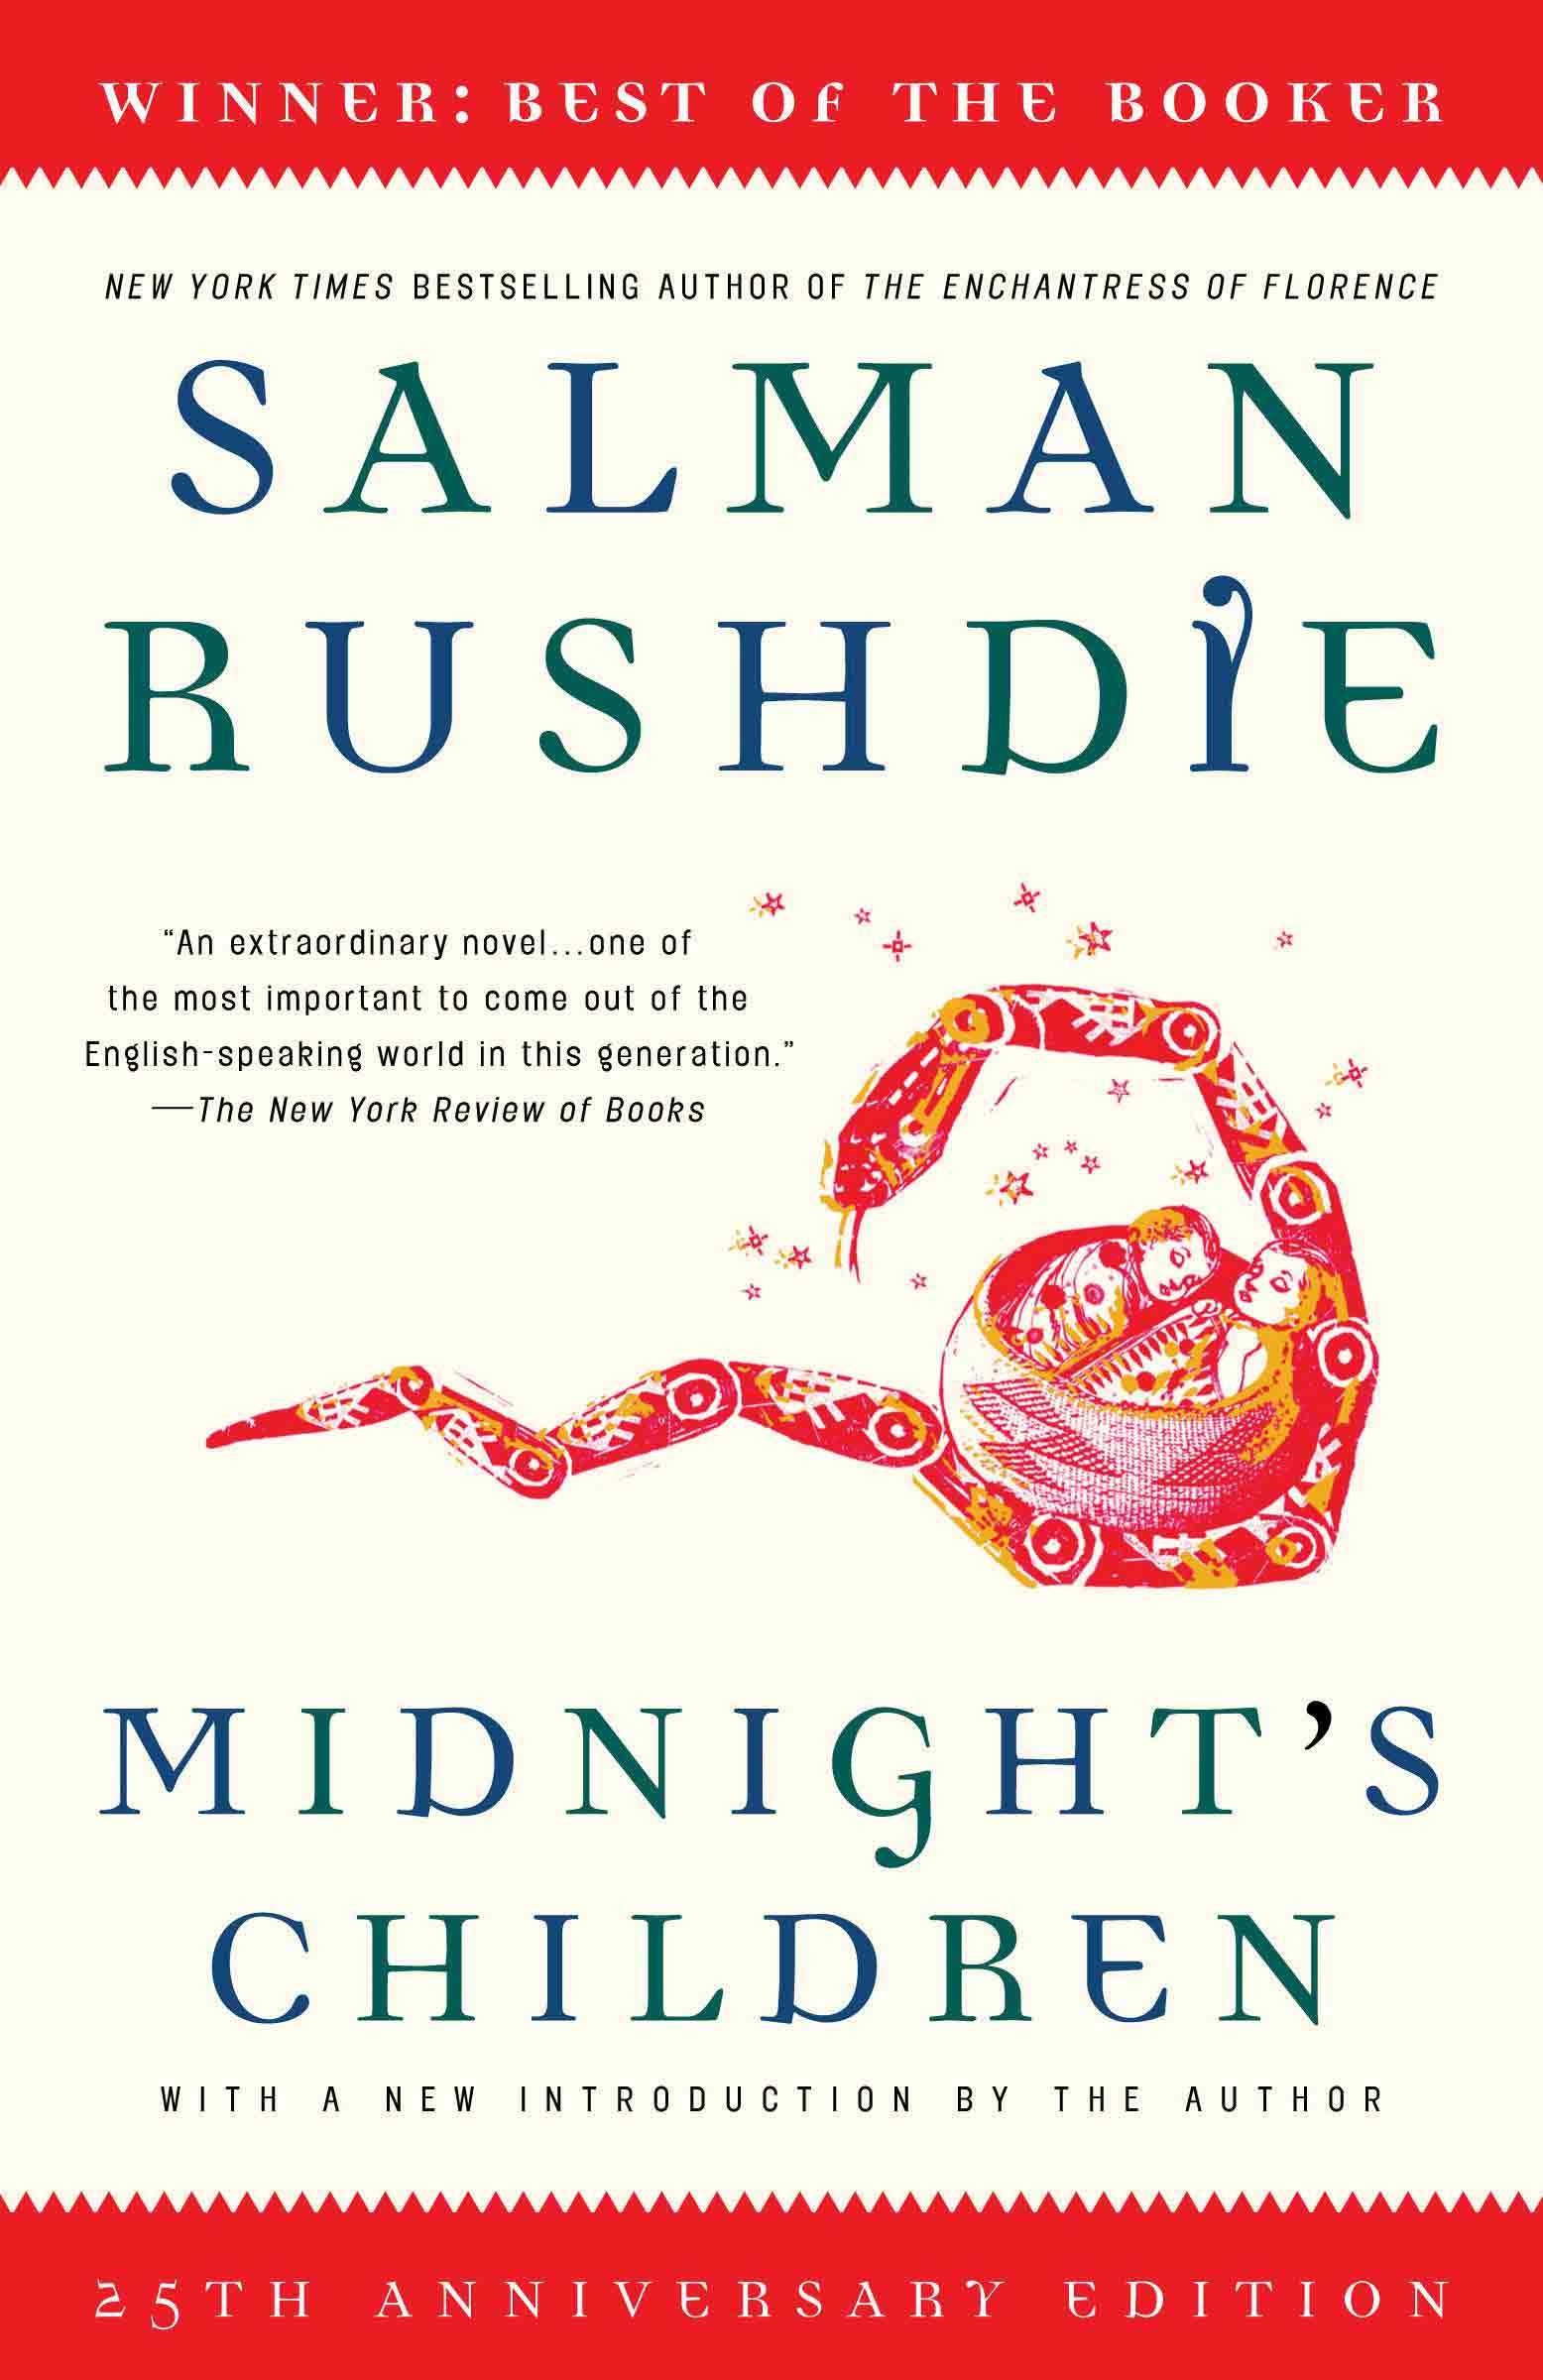 02. Midnight’s Children by Salman Rushdie (SOLD OUT)